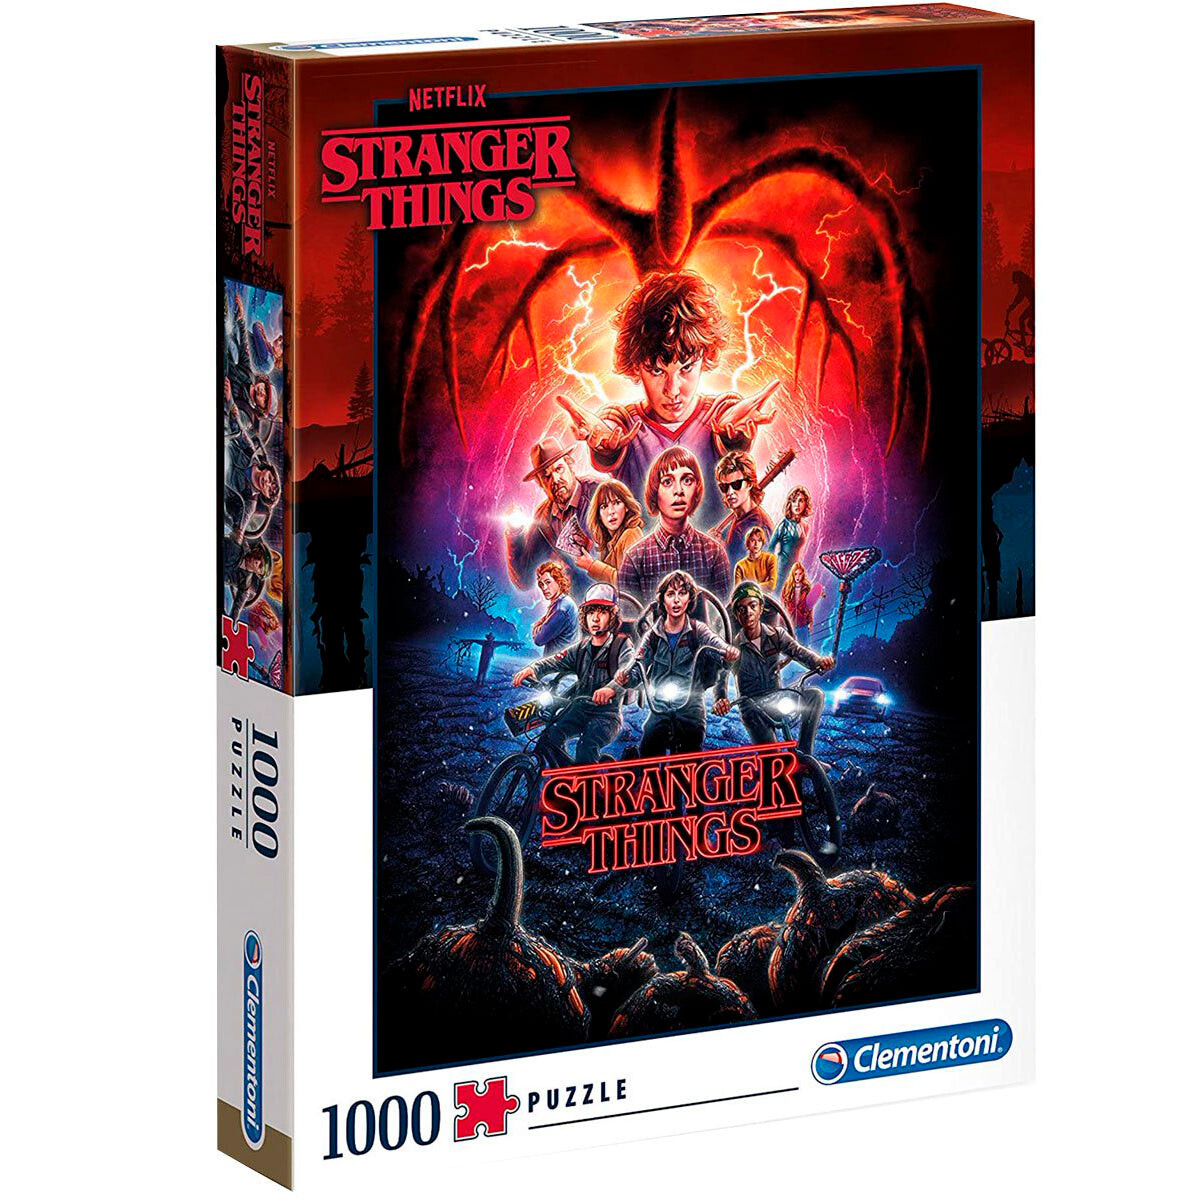 Puzzle Clementoni Stranger Things 1000 Pzs Calidad HD 